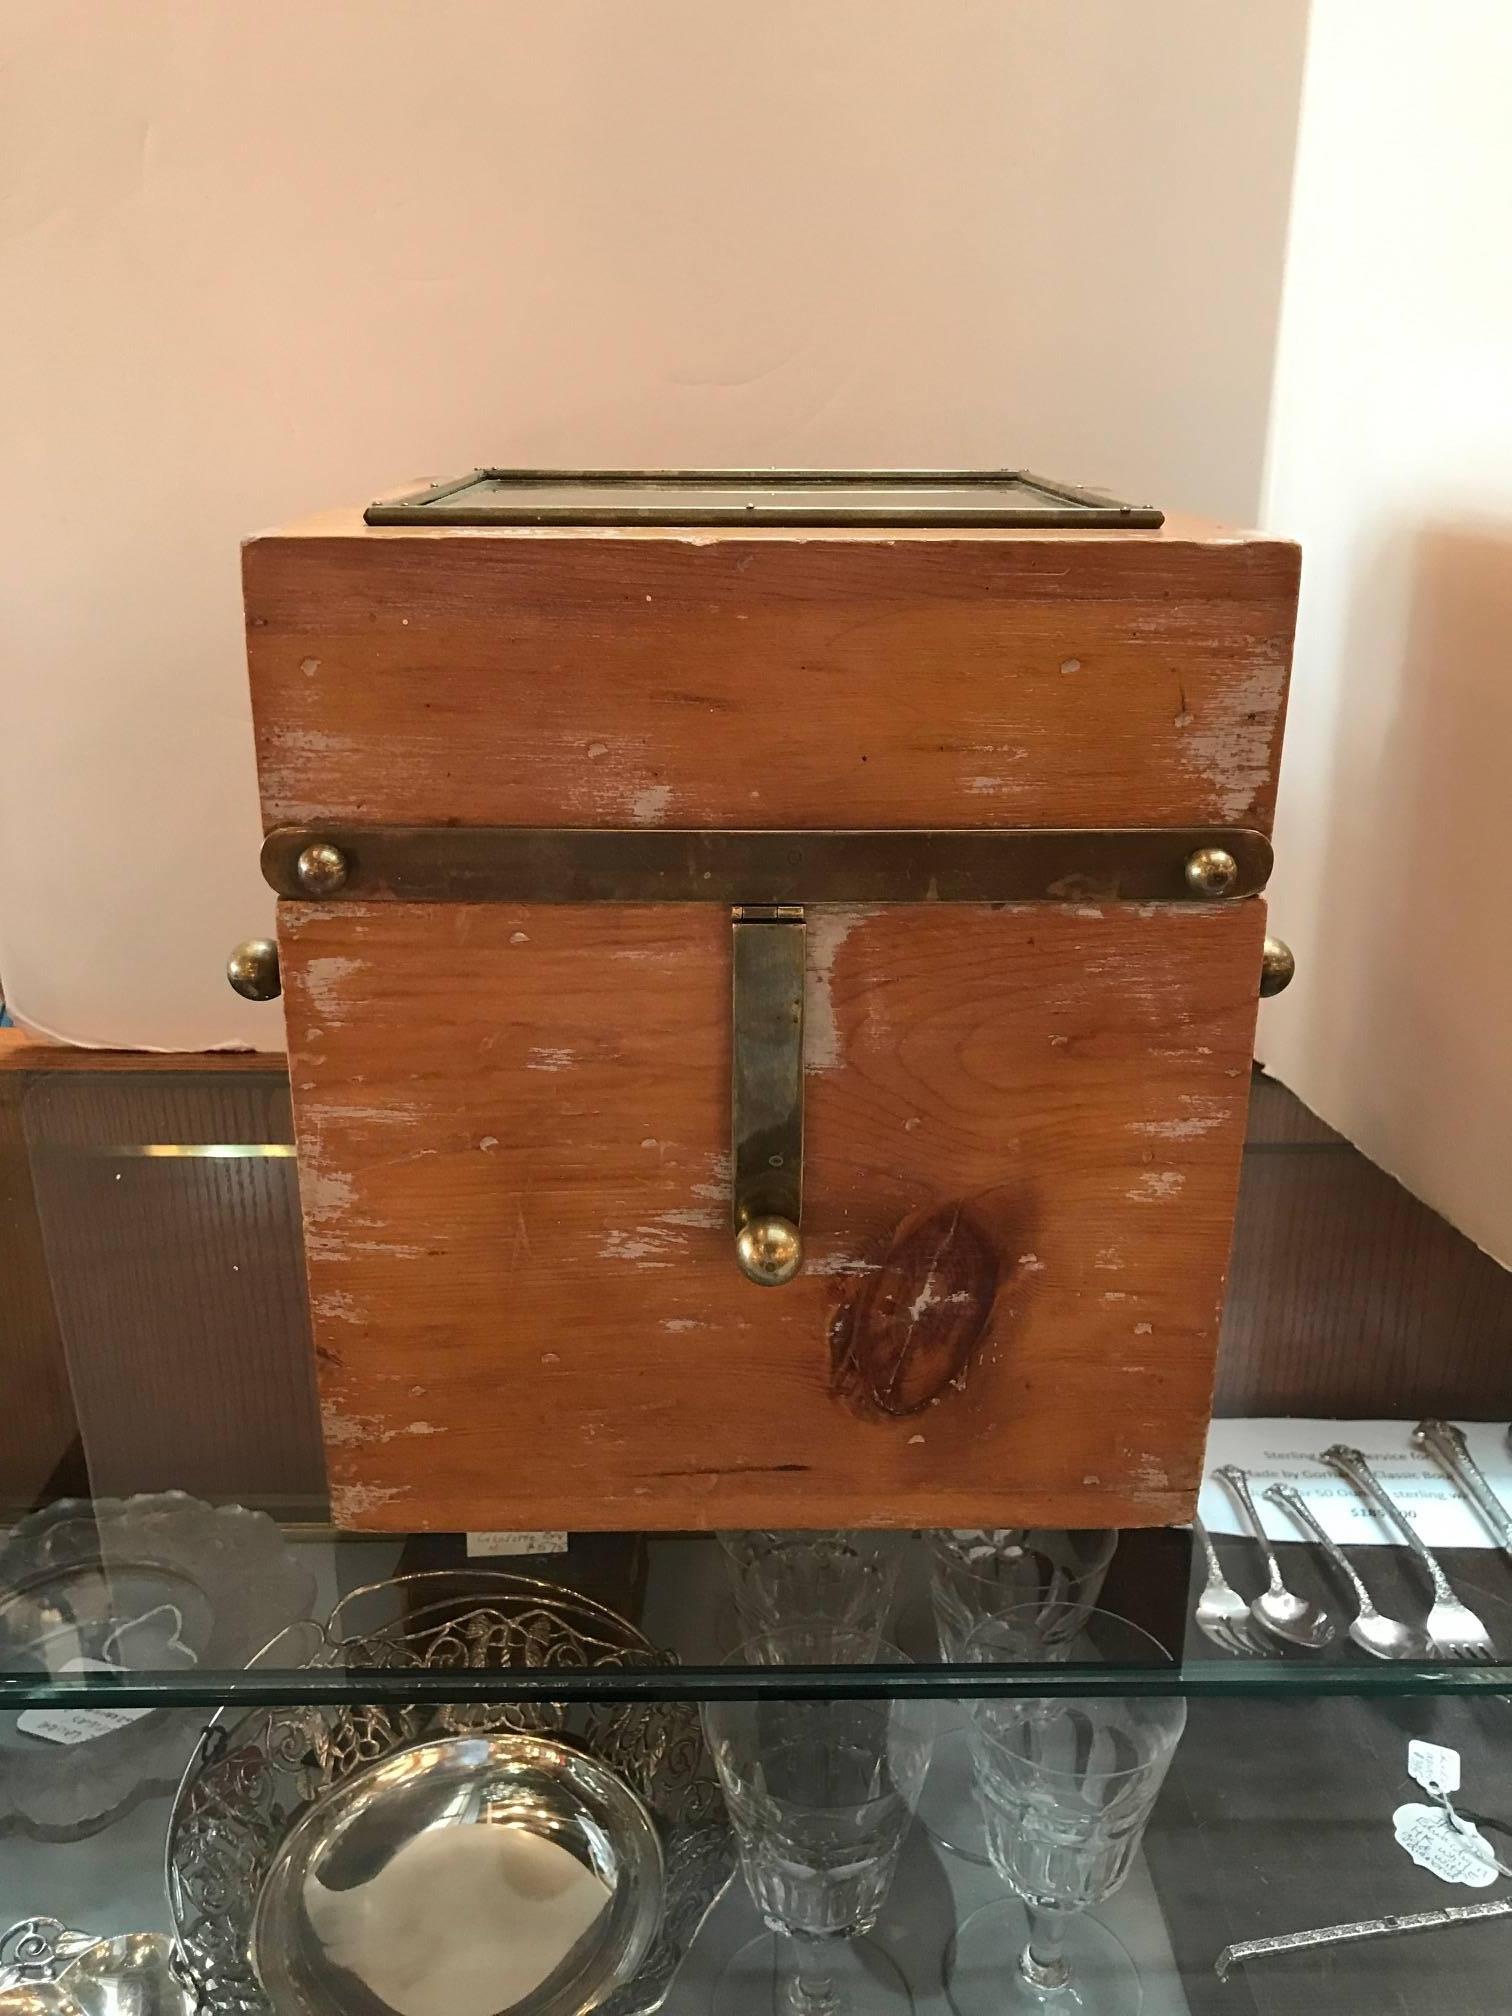 Very functional elmwood and brass four compartment spirits caddie. The wood box with metal top and brass handles with four handblown spirit decanters with brass stoppers.